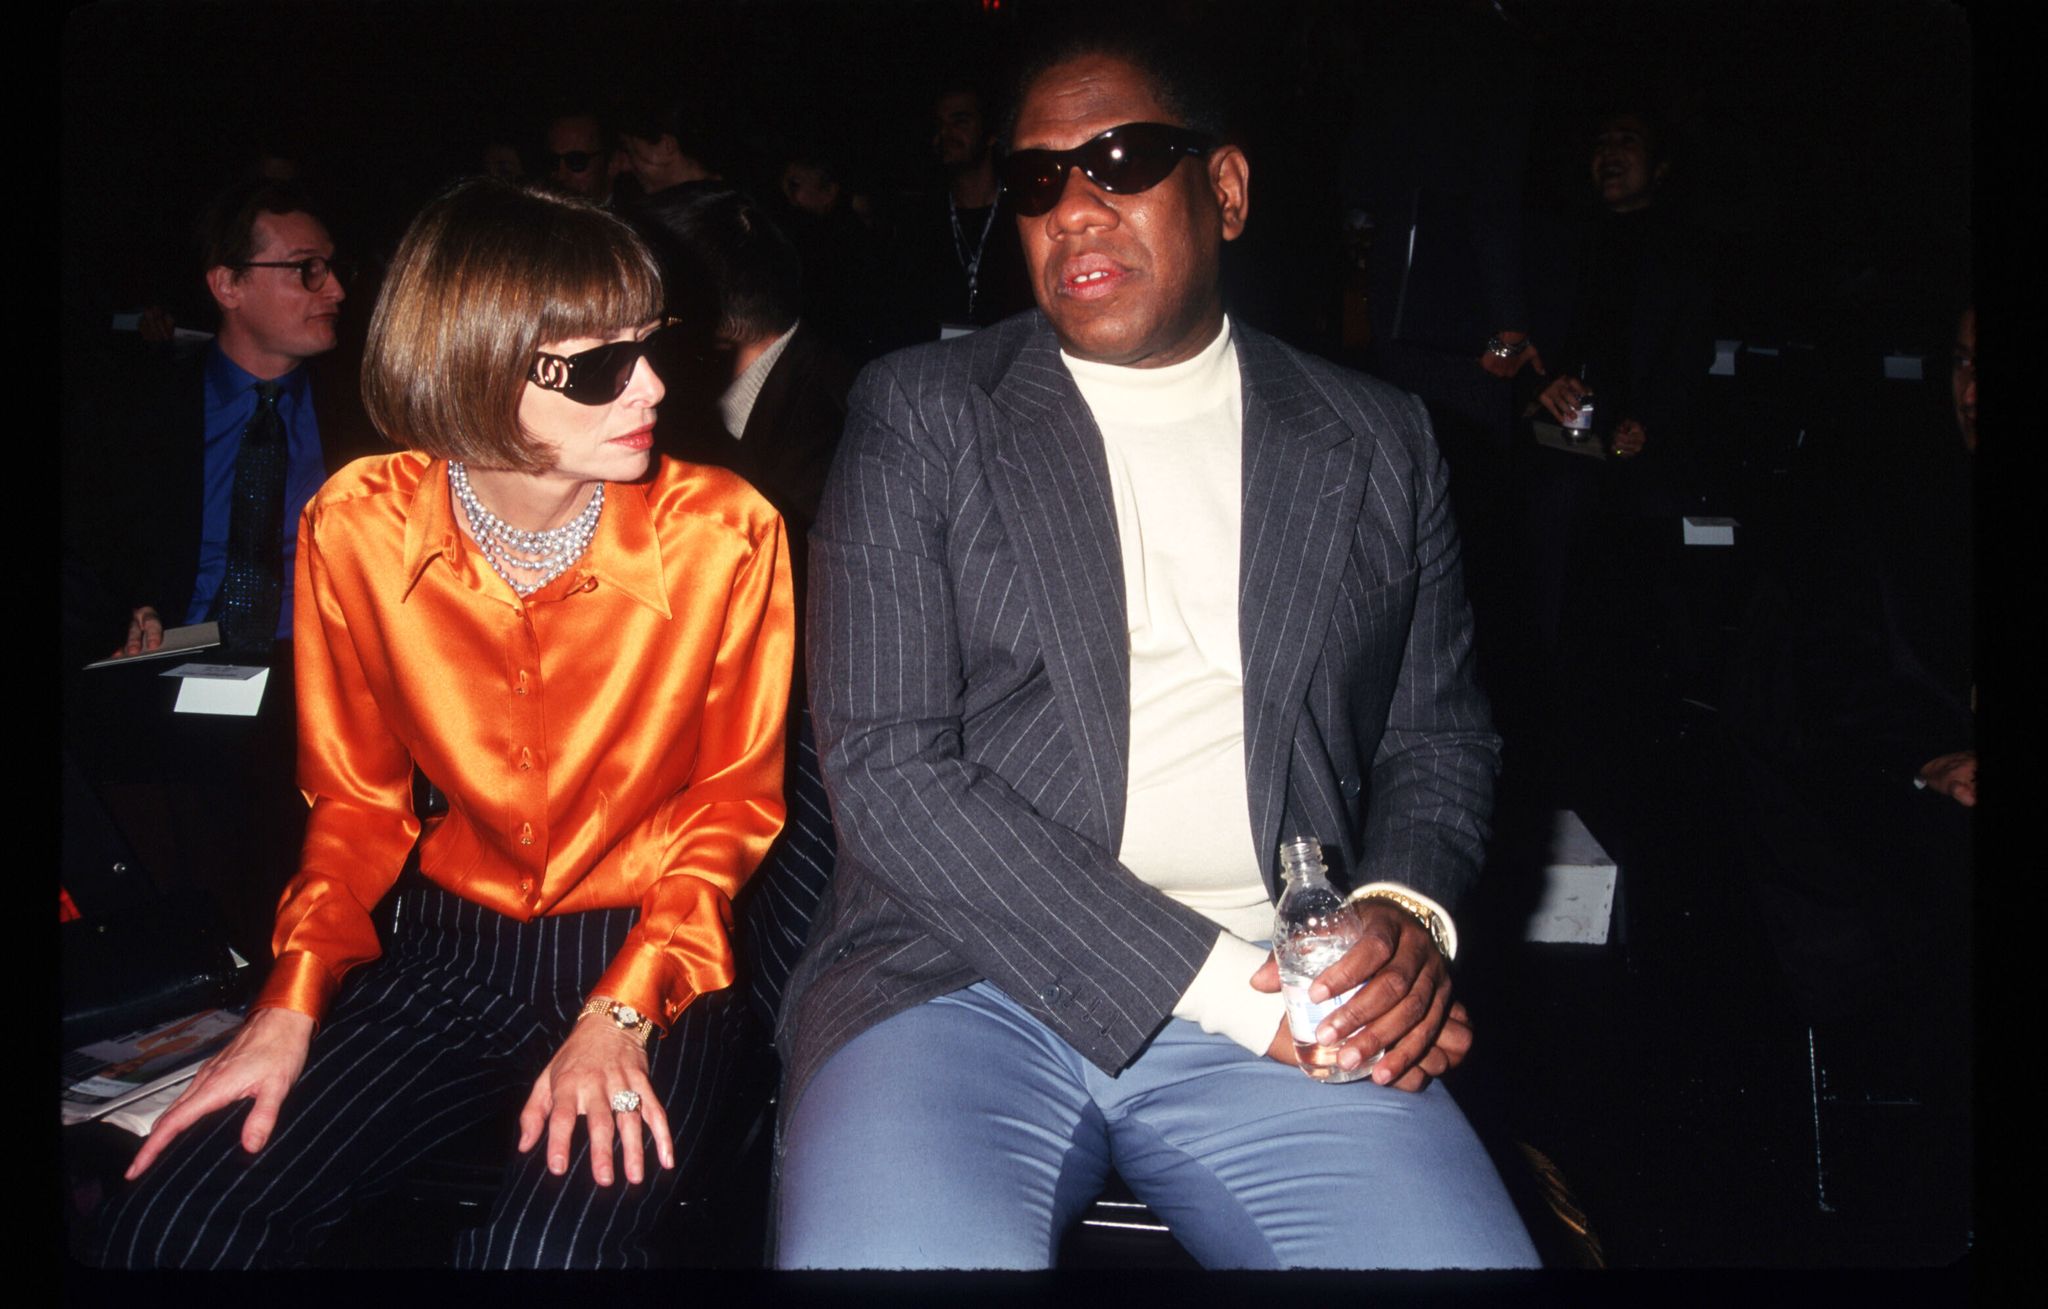 284466 01 vogue magazine editor anna wintour and andre leon tilley attend the 7th on sixth fashion show october 30, 1996 in new york city the 7th on sixth fashion show is held to preview the collections of the worlds most prestigious designers, including donna karan, calvin klein, ralph lauren, nicole miller, and others photo by evan agostiniliaison